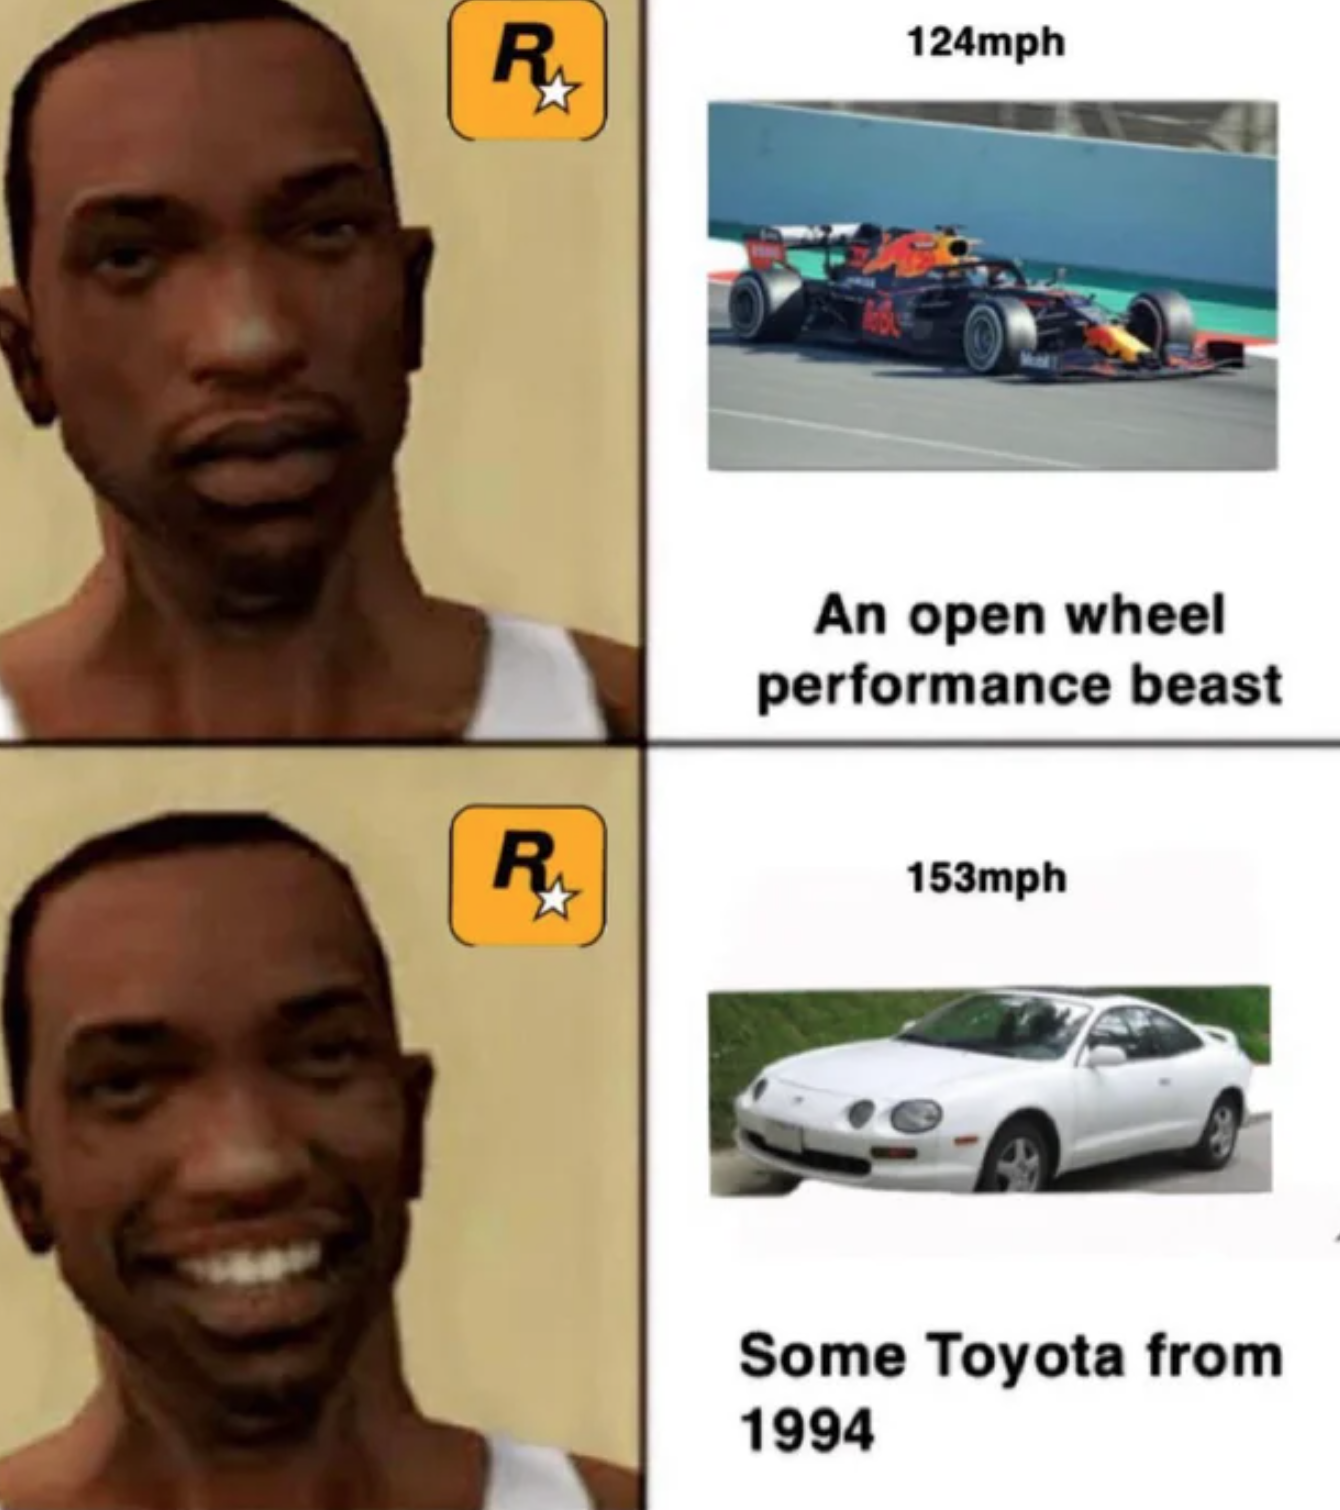 funny gaming memes - h An open wheel performance beast R 153mph Some Toyota from 1994